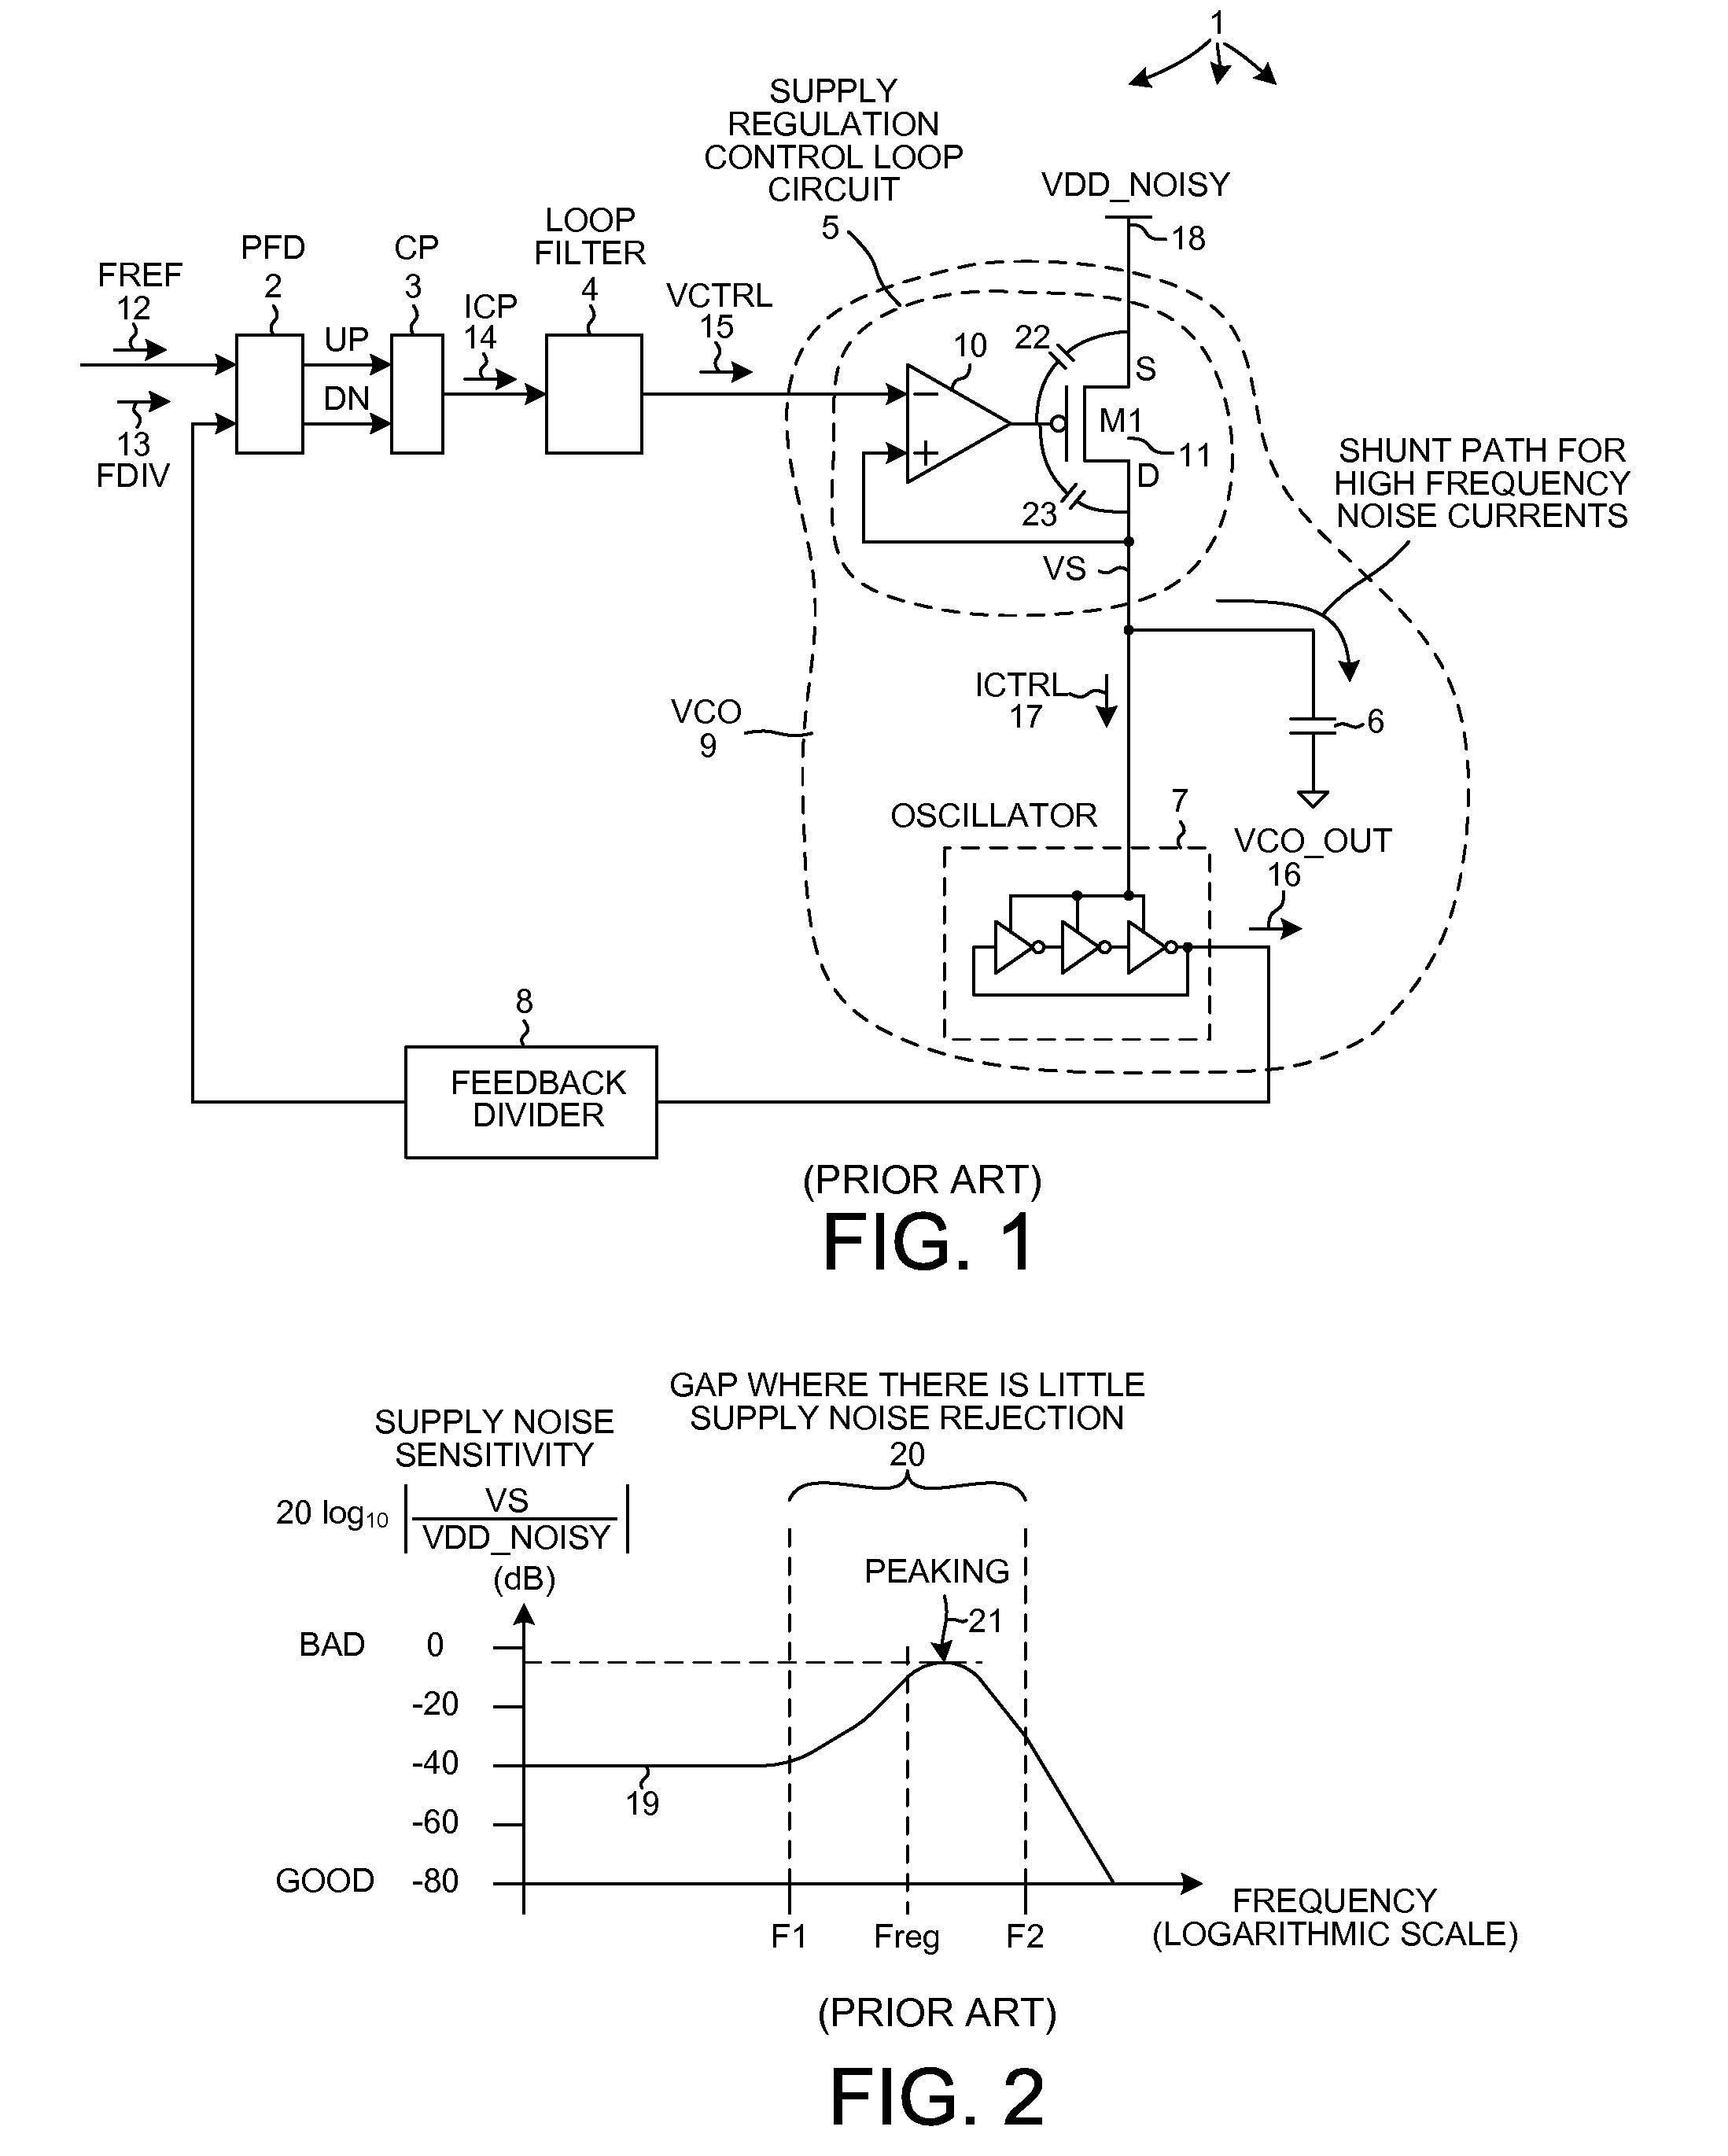 Supply-regulated VCO architecture